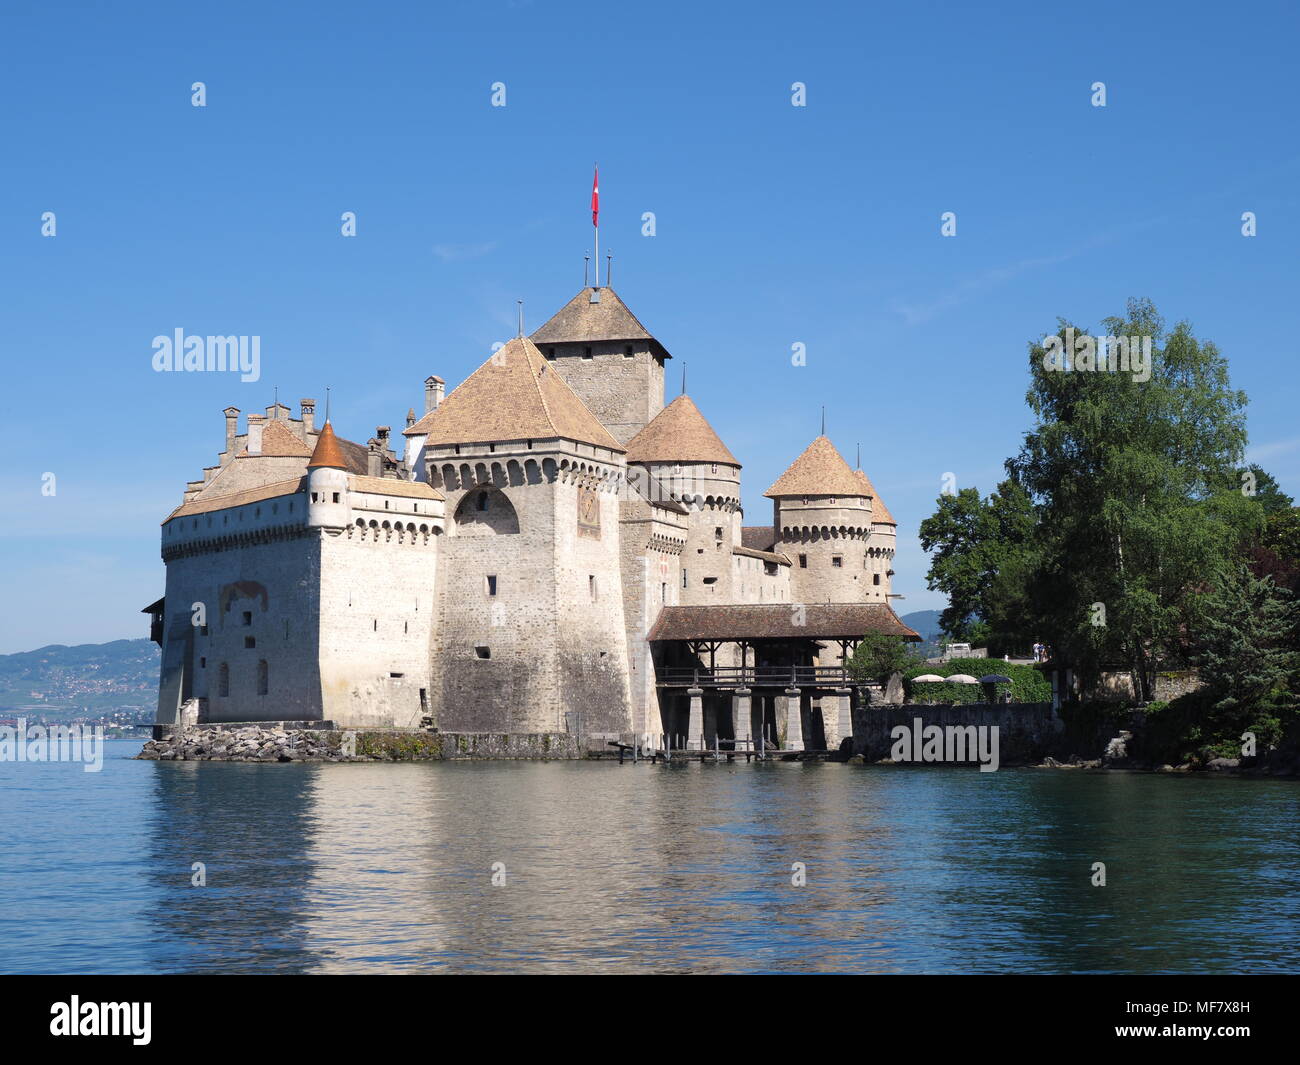 MONTREUX, SWITZERLAND on JULY 2017: Medieval Chateau de Chillon castle scenery at Lake Geneva in european city, Canton of Vaud, landscapes of alpine L Stock Photo